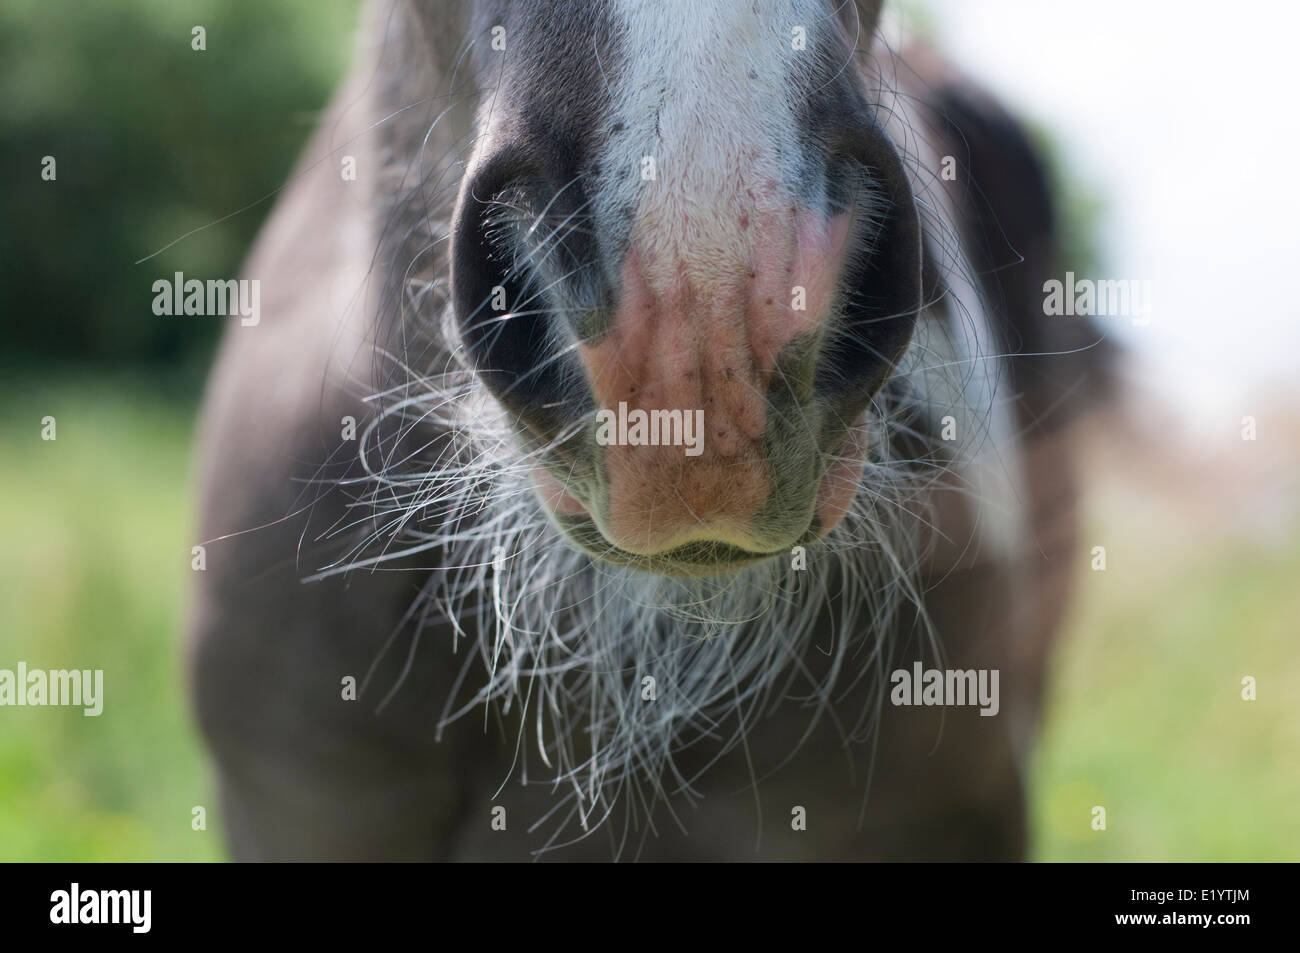 Young foal, close up of whiskers. Stock Photo